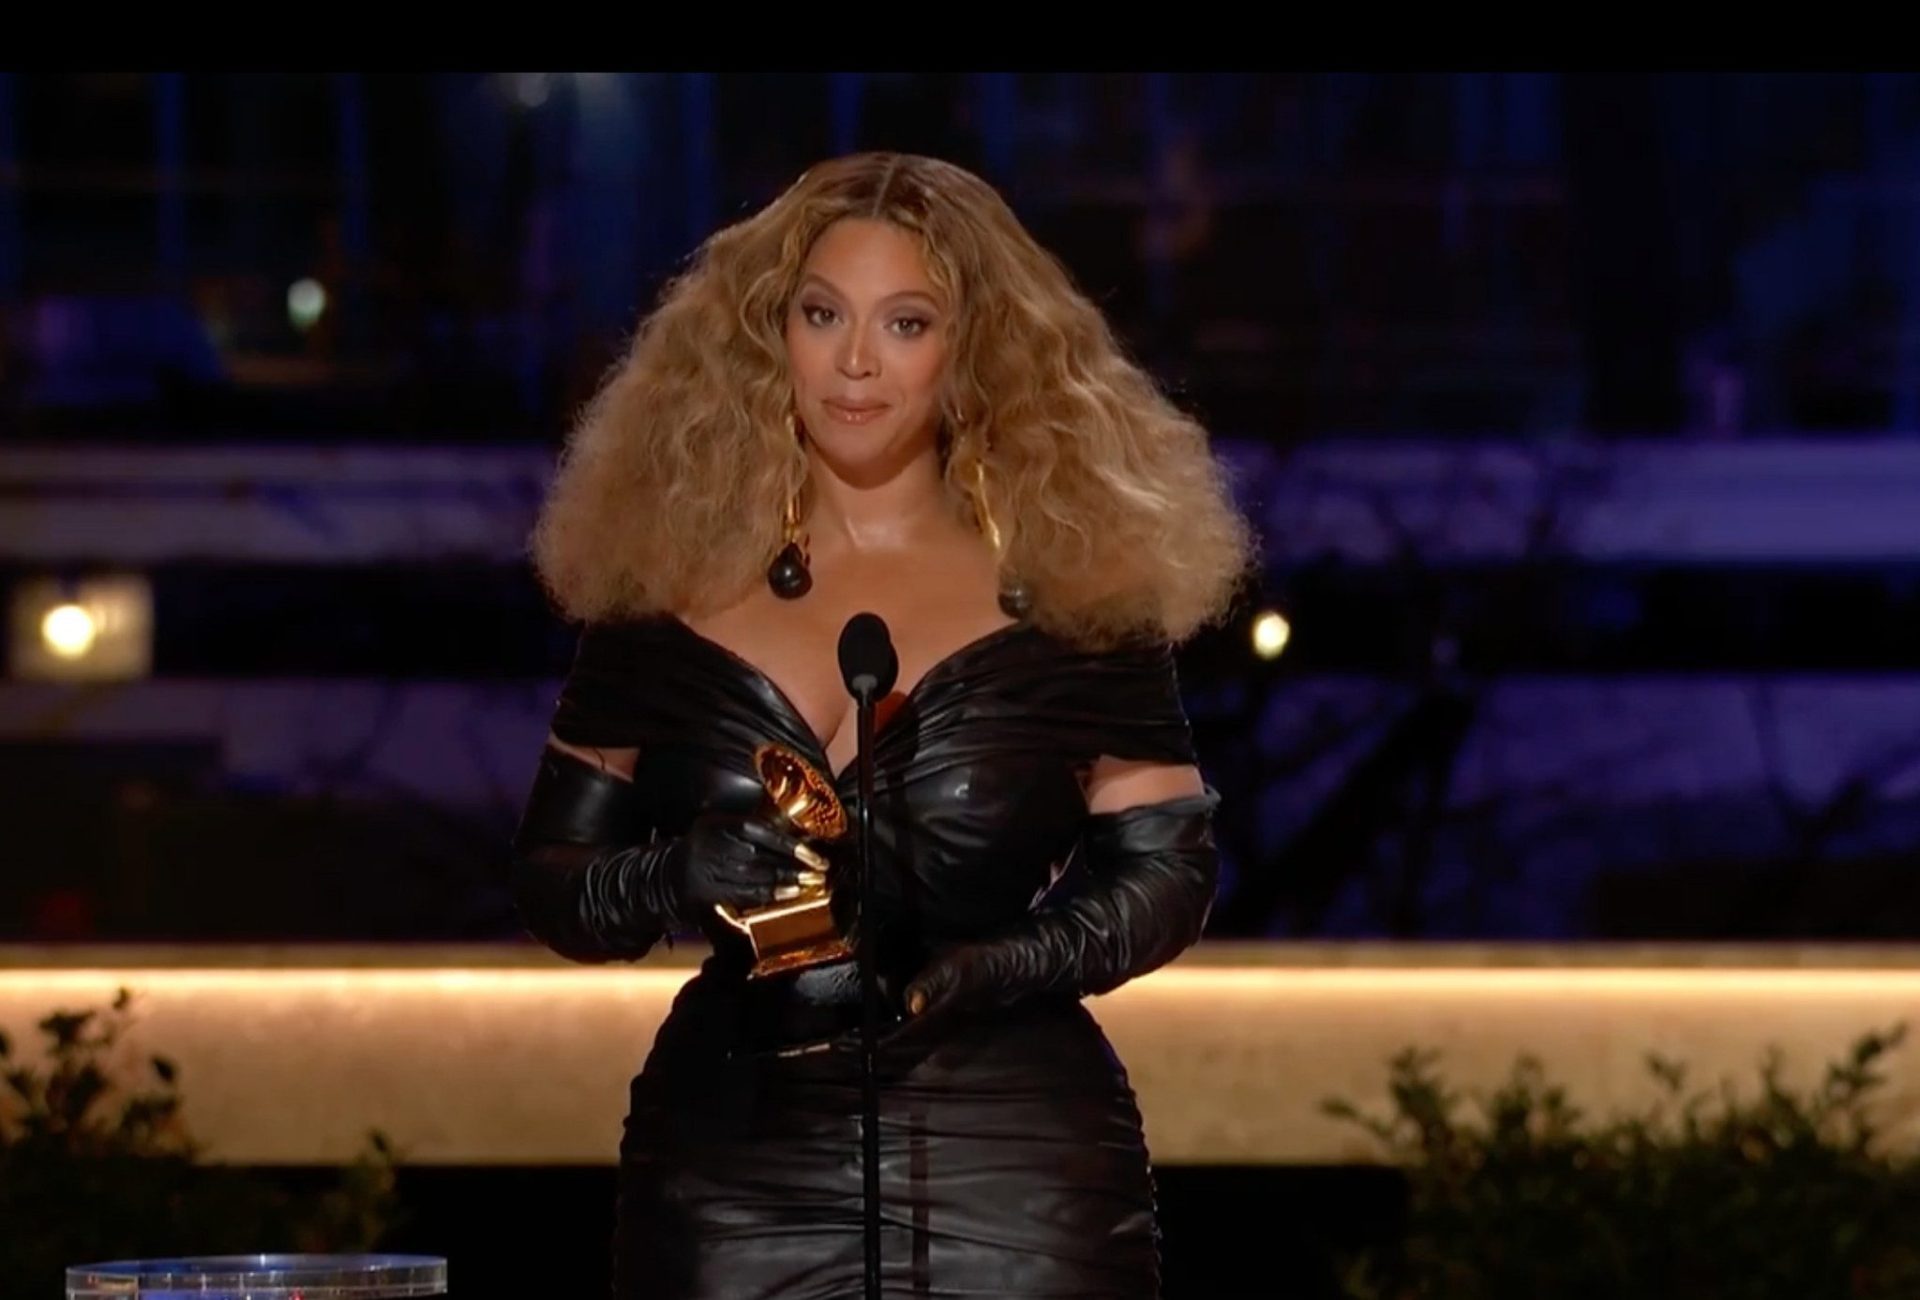 Beyoncé now has the most Grammy Awards in history